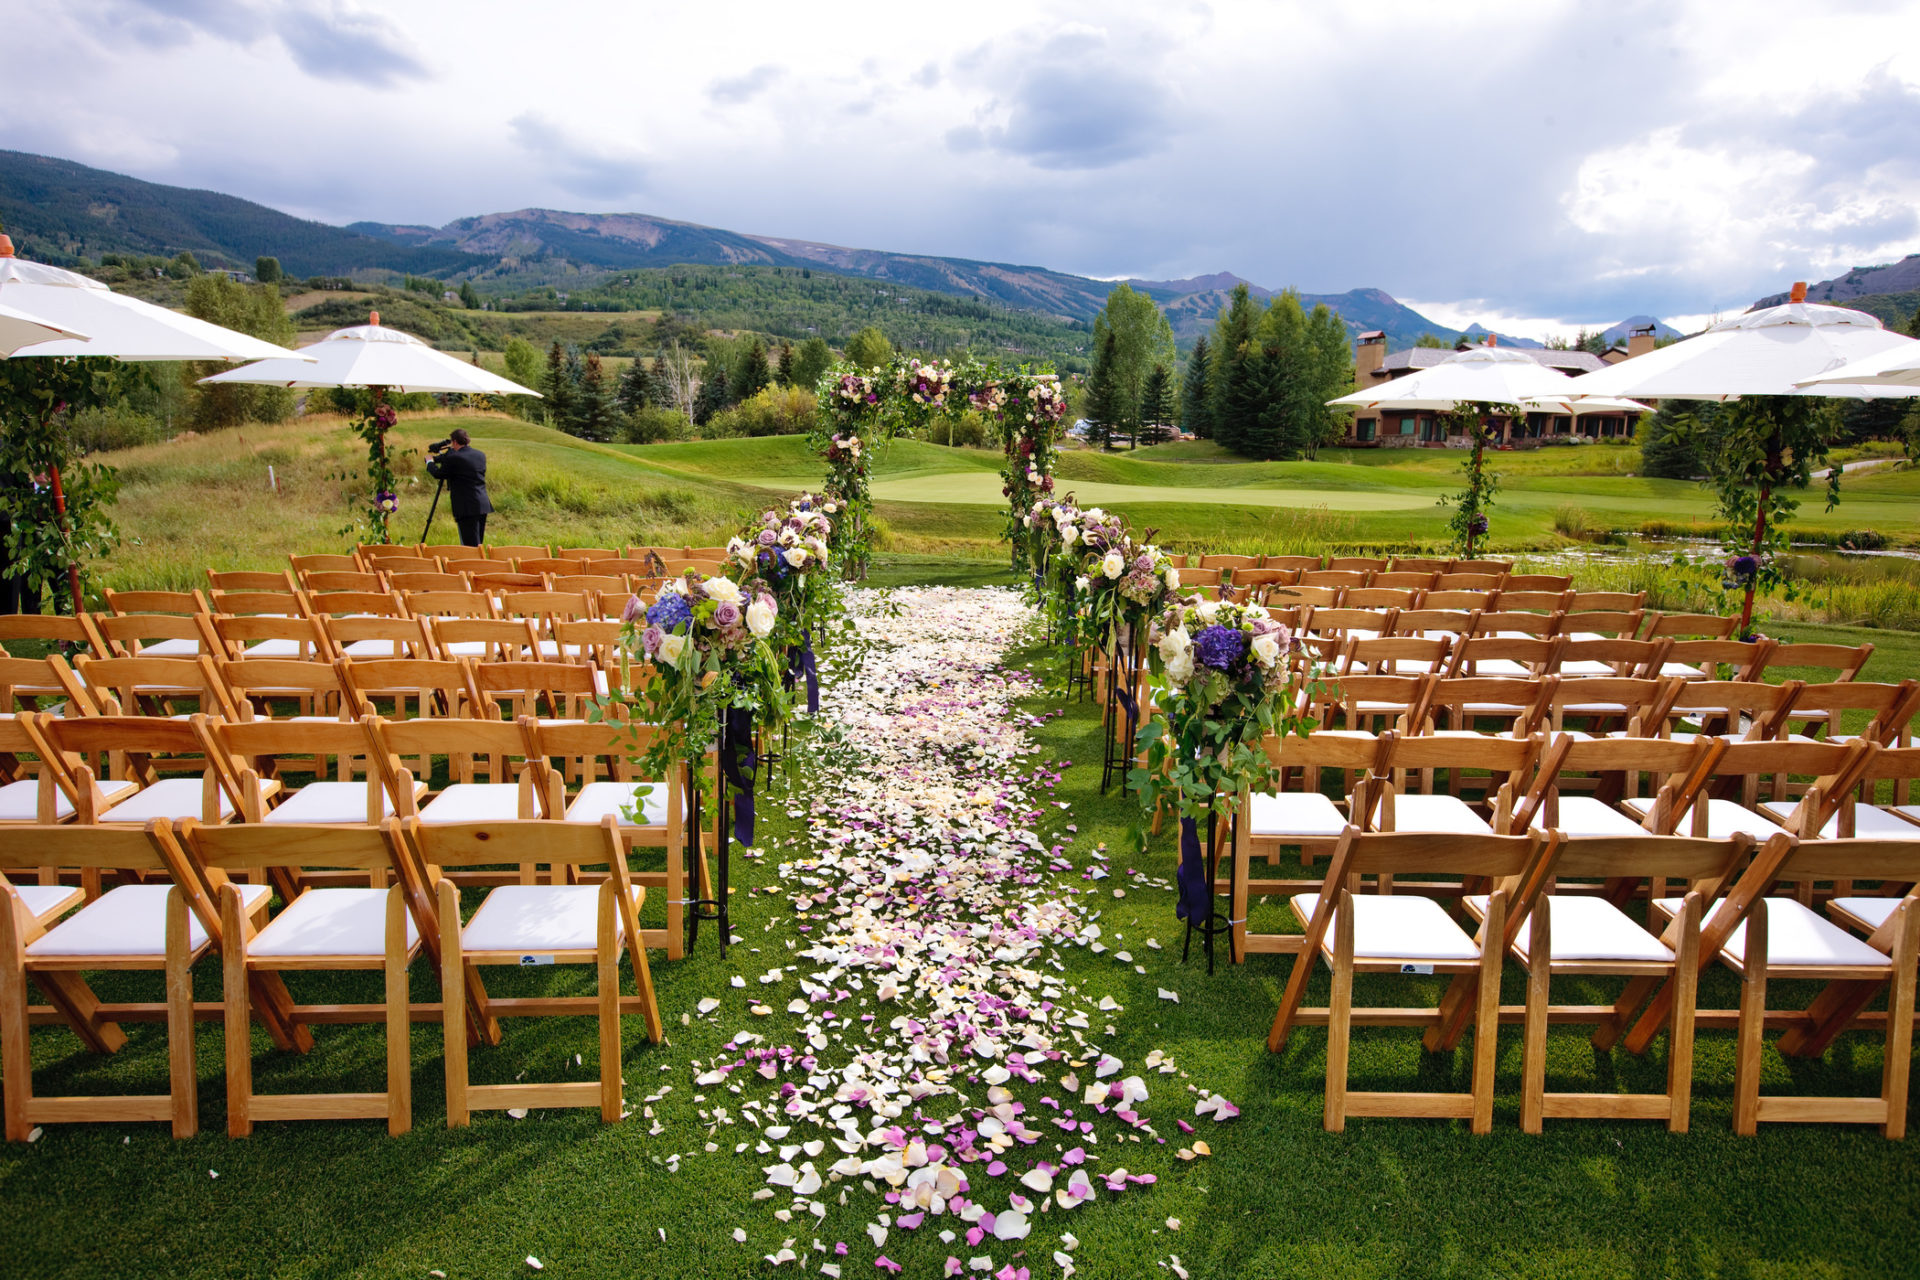 Outdoor seating at Snowmass club for reception